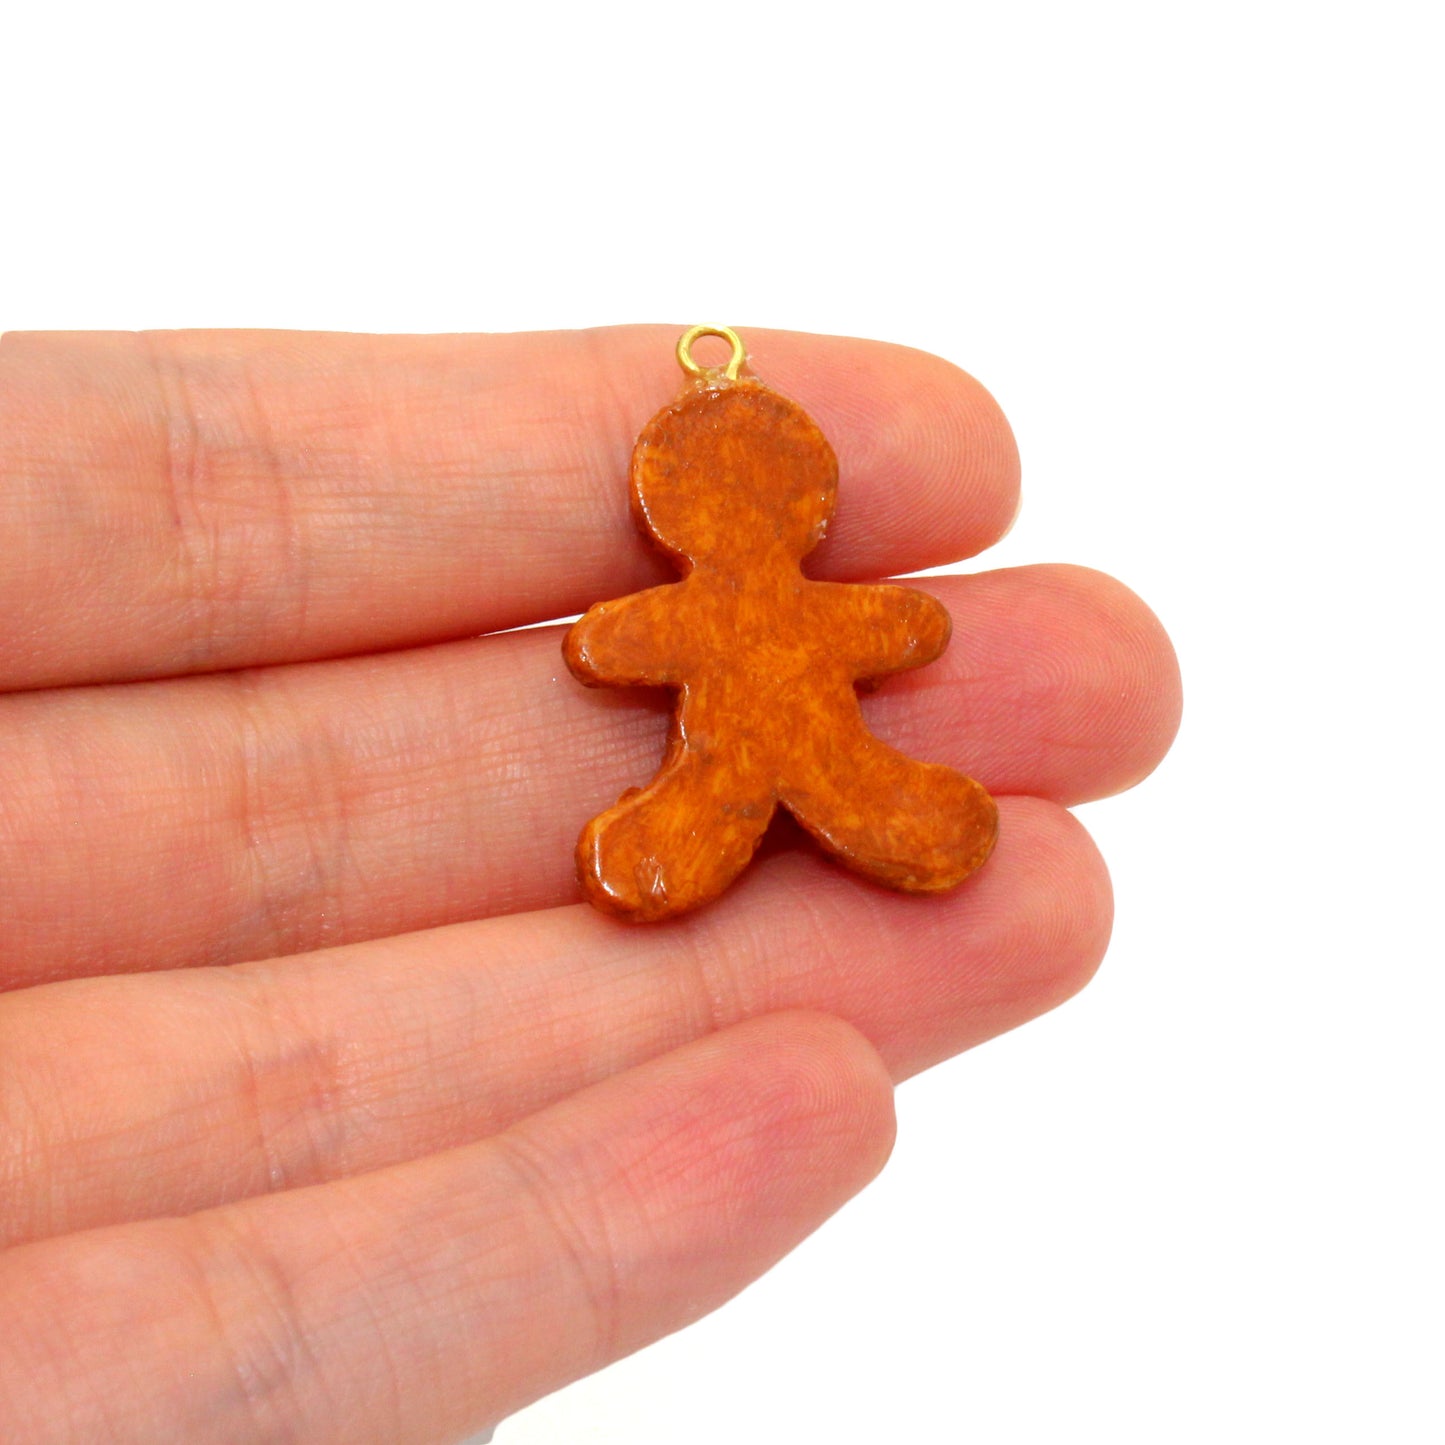 Gingerbread Man Cookie Bow and Pearl Earrings - Limited Edition Holiday Collection